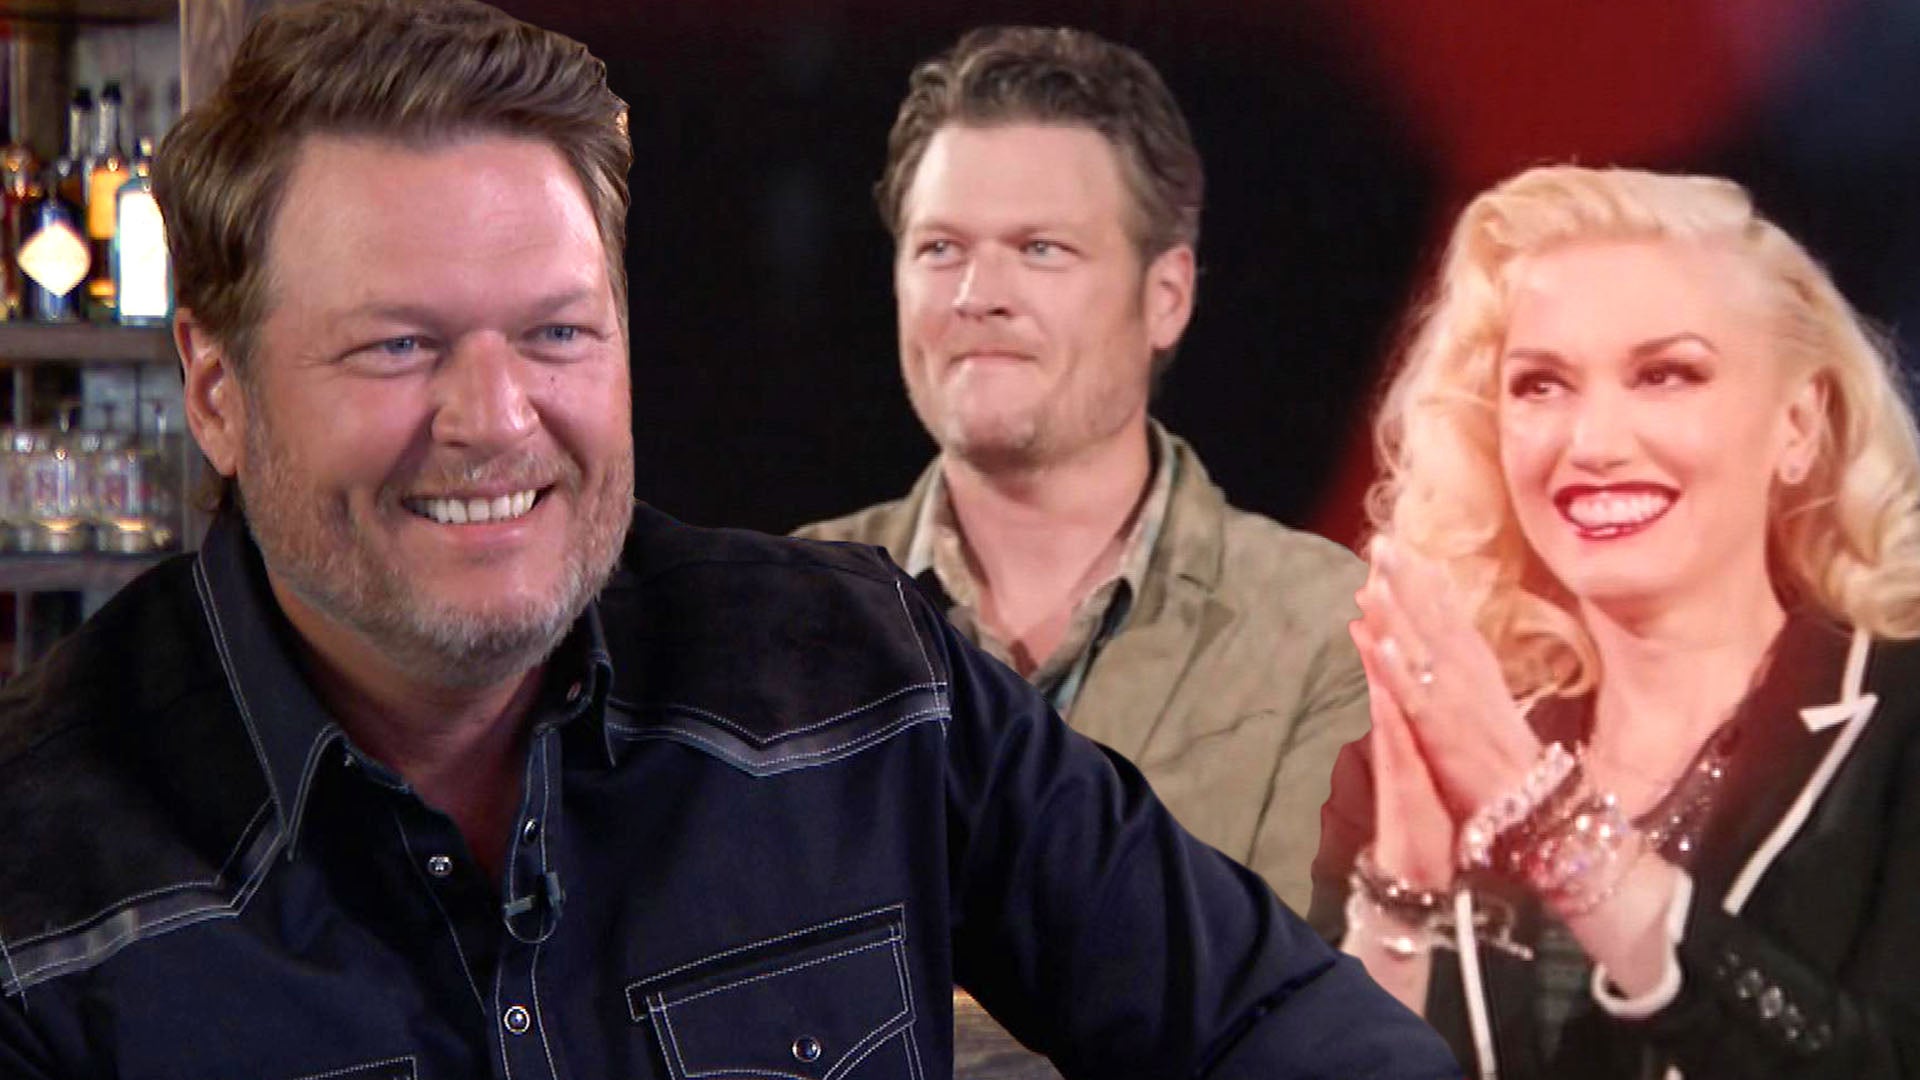 Blake Shelton on 10 Years of Having Gwen Stefani in His Life and Joy of Being a Stepdad (Exclusive)